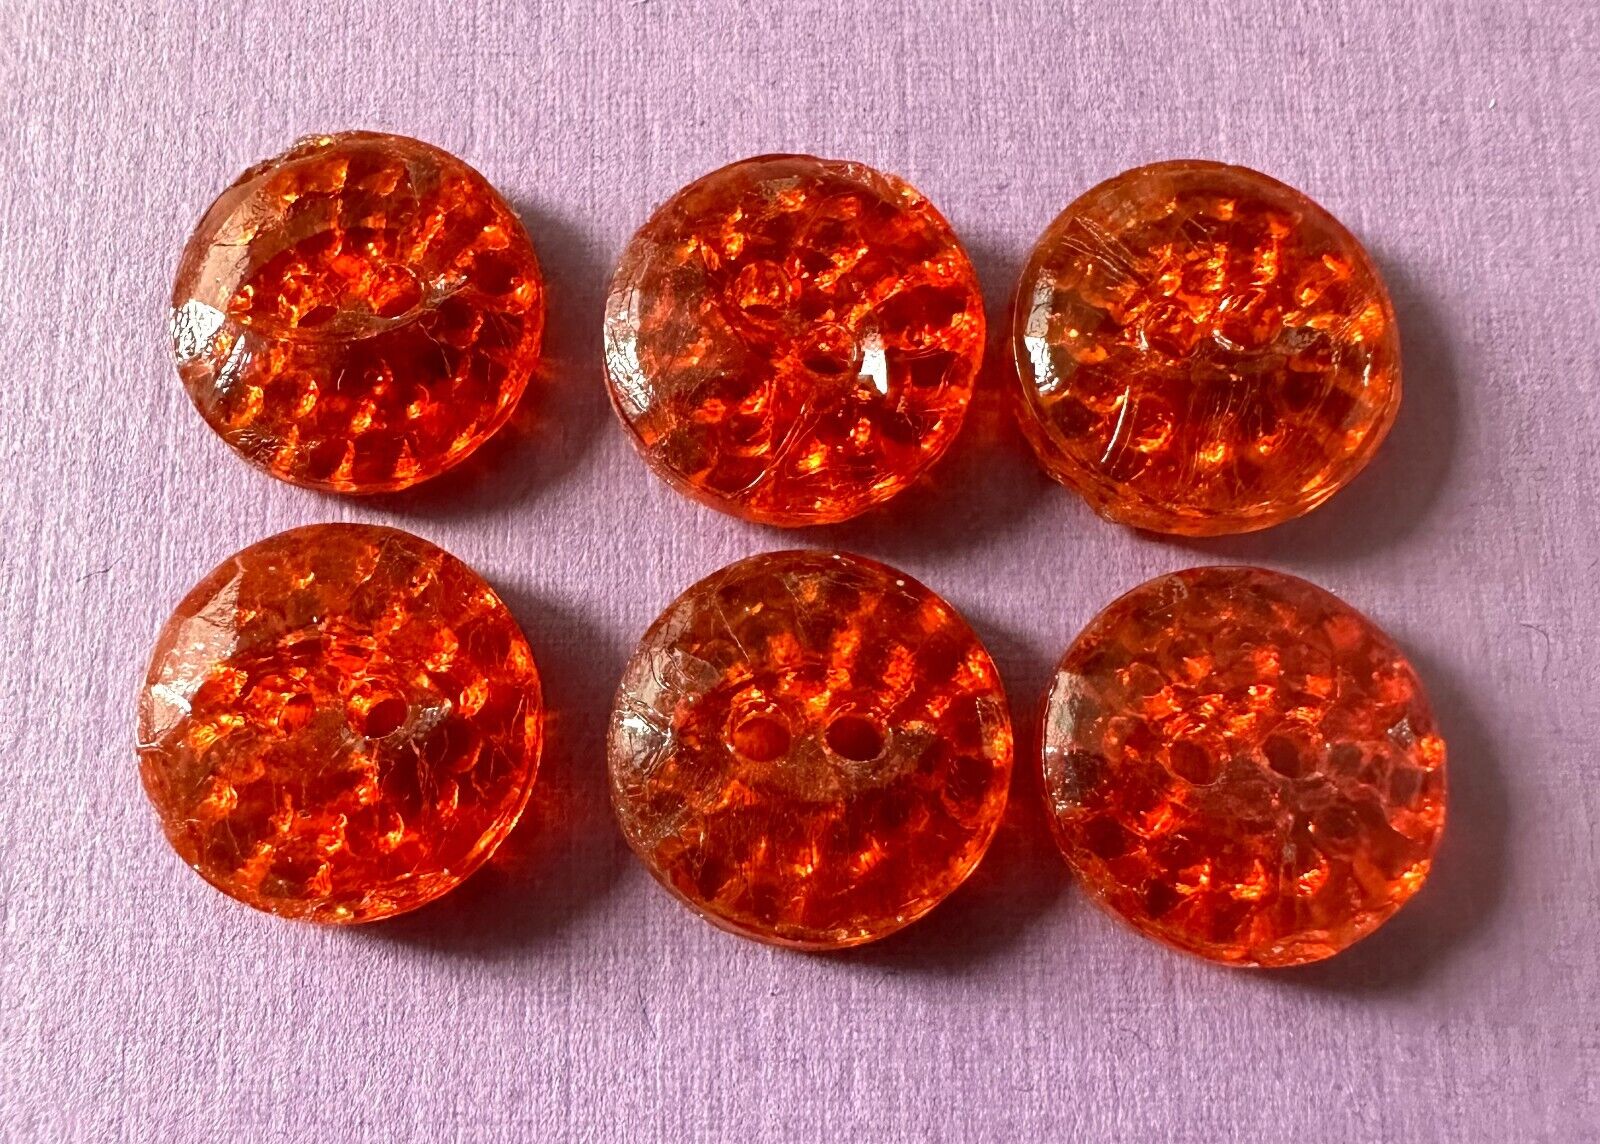 6 Vintage Unusual Orange Glass Buttons - Very Textured, Gorgeous Color